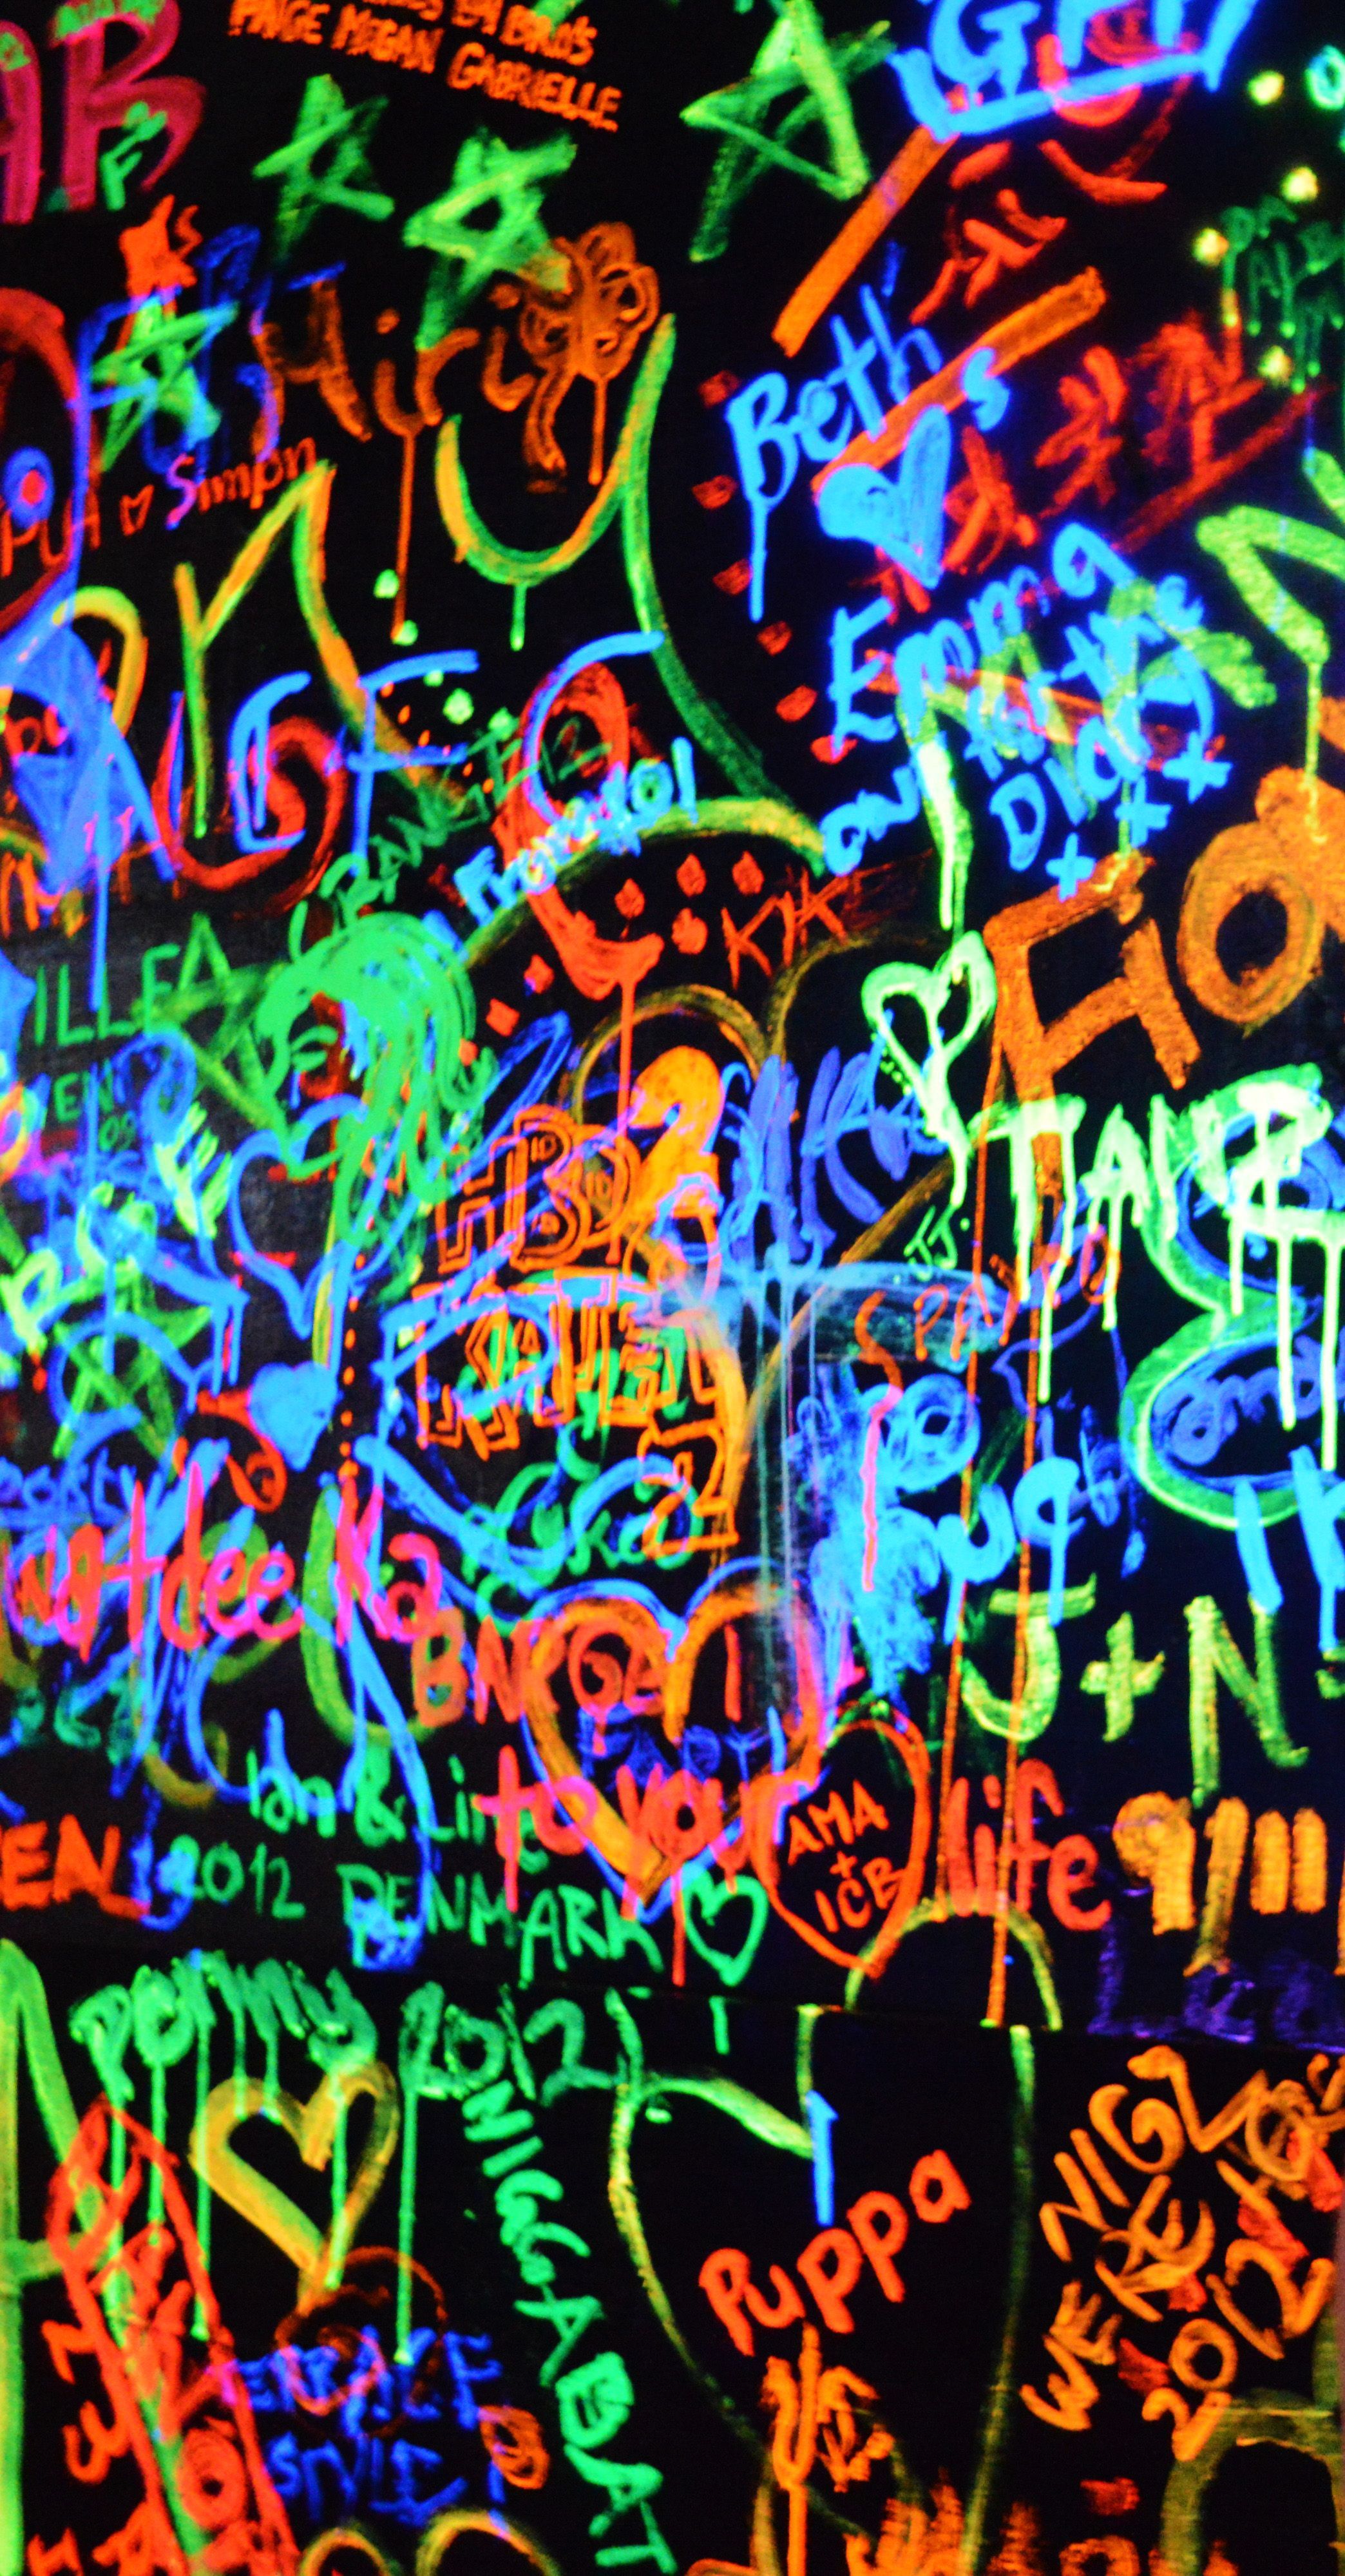 Neon tagging s on